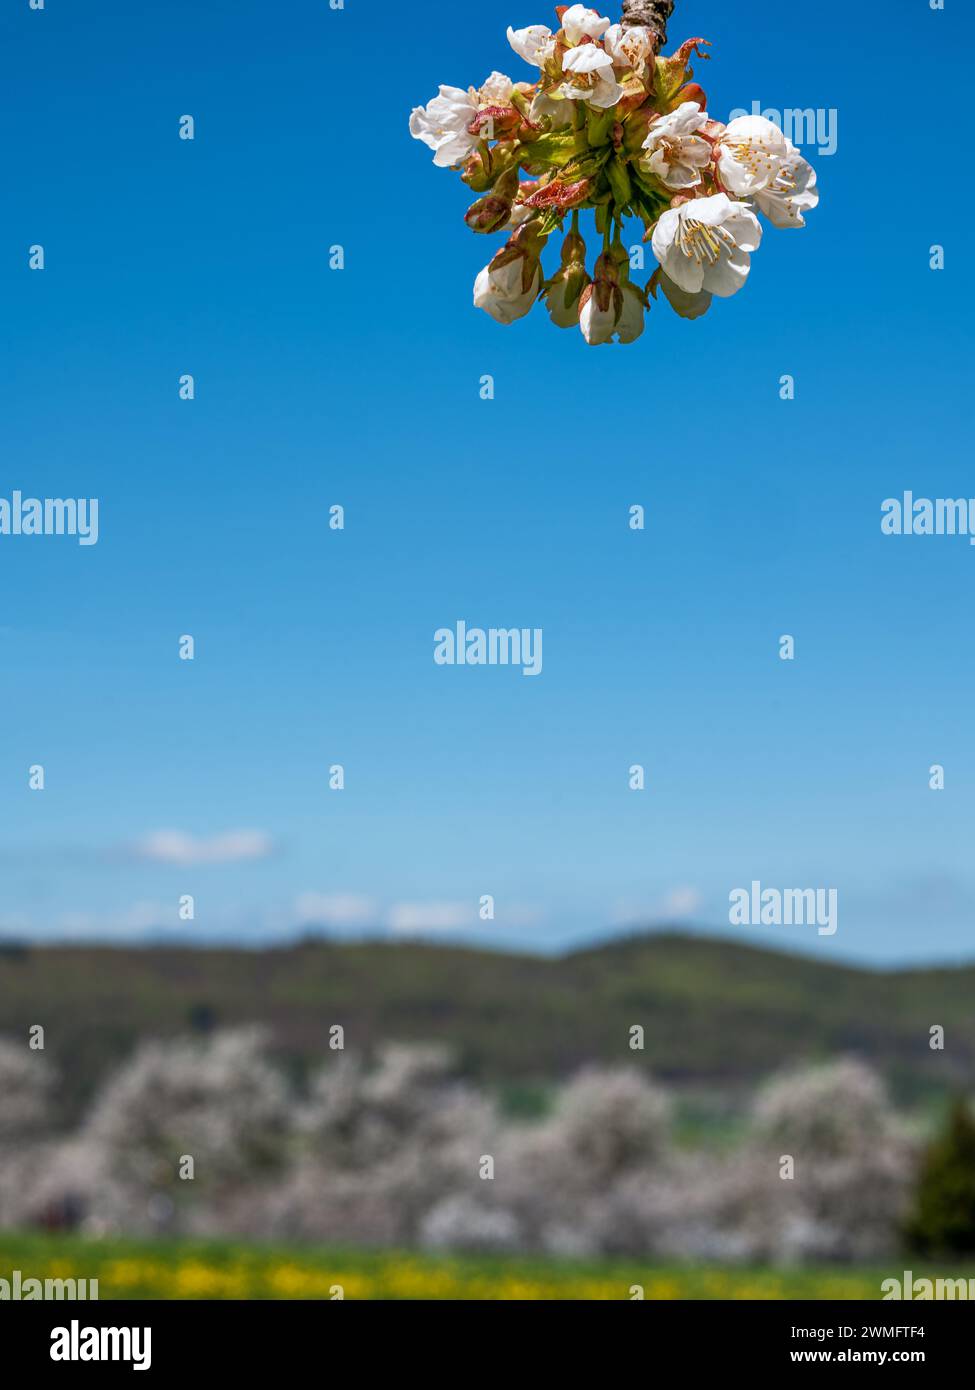 Close-up of a branch with cherry blossoms in front of a blurred landscape with cherry trees and blue sky Stock Photo